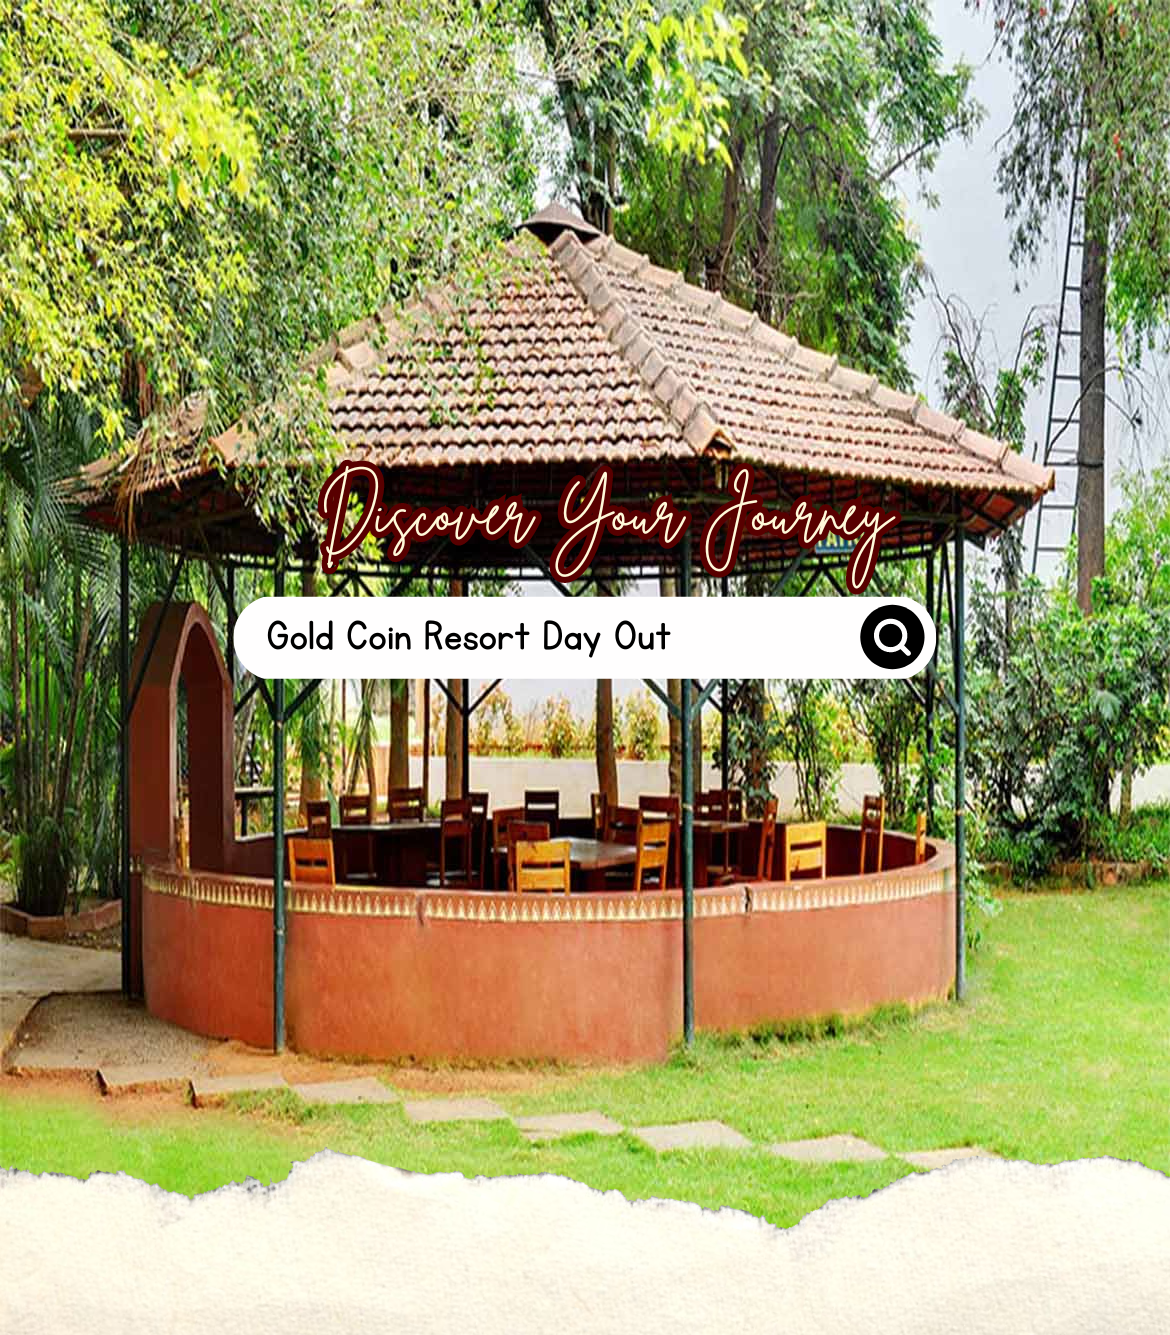 Gold Coin Resort Day Out near Bangalore